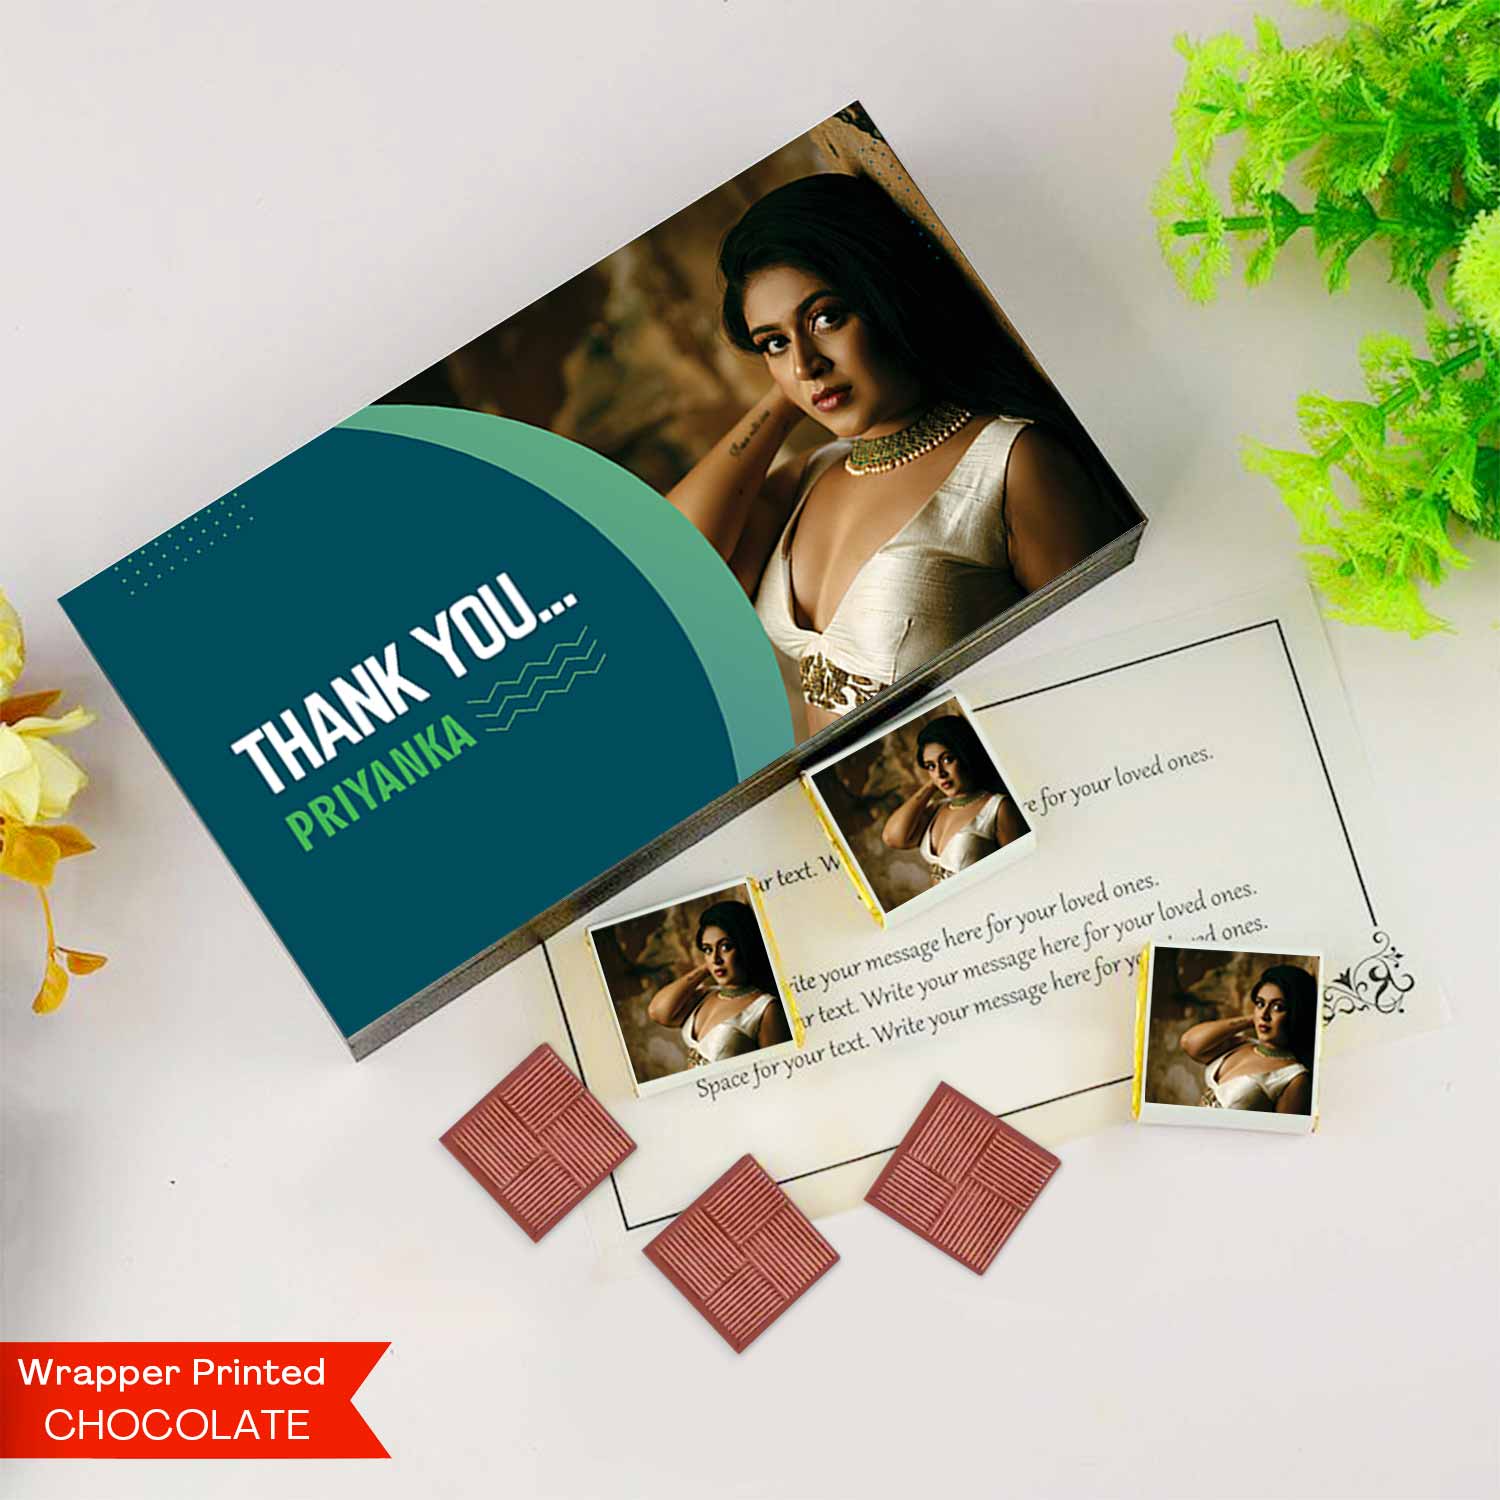 Thanks to friend I  Delicious chocolates I  Image/Name printed chocolate box I  Elegant wooden packaging I  Free shipping across India